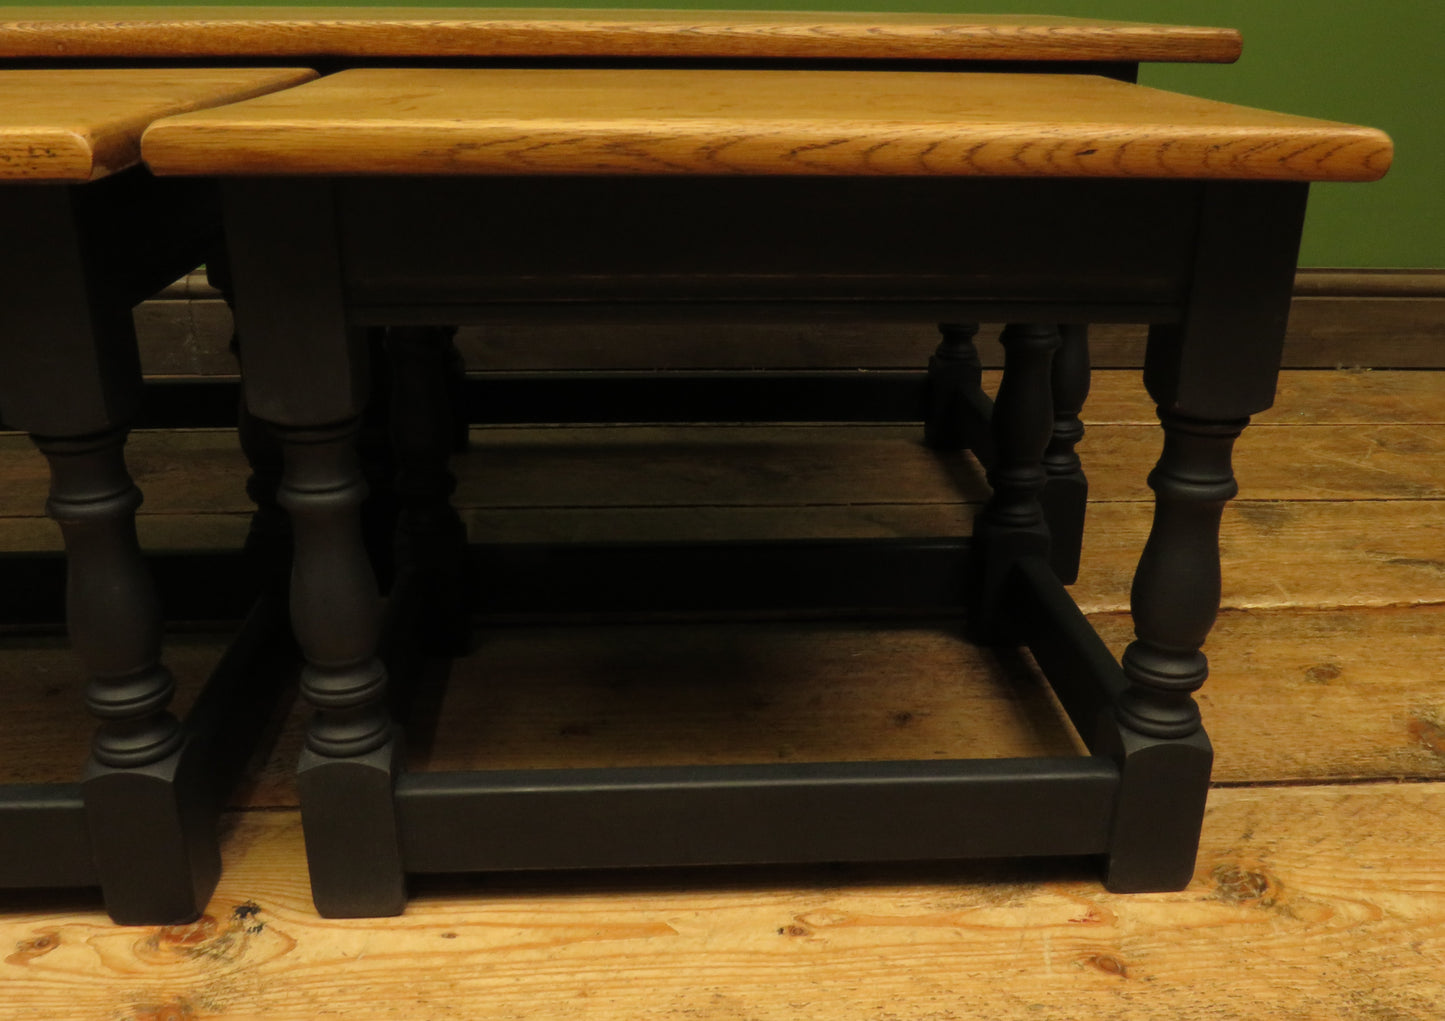 Vintage Nest of Tables with Black Bases and wooden tops